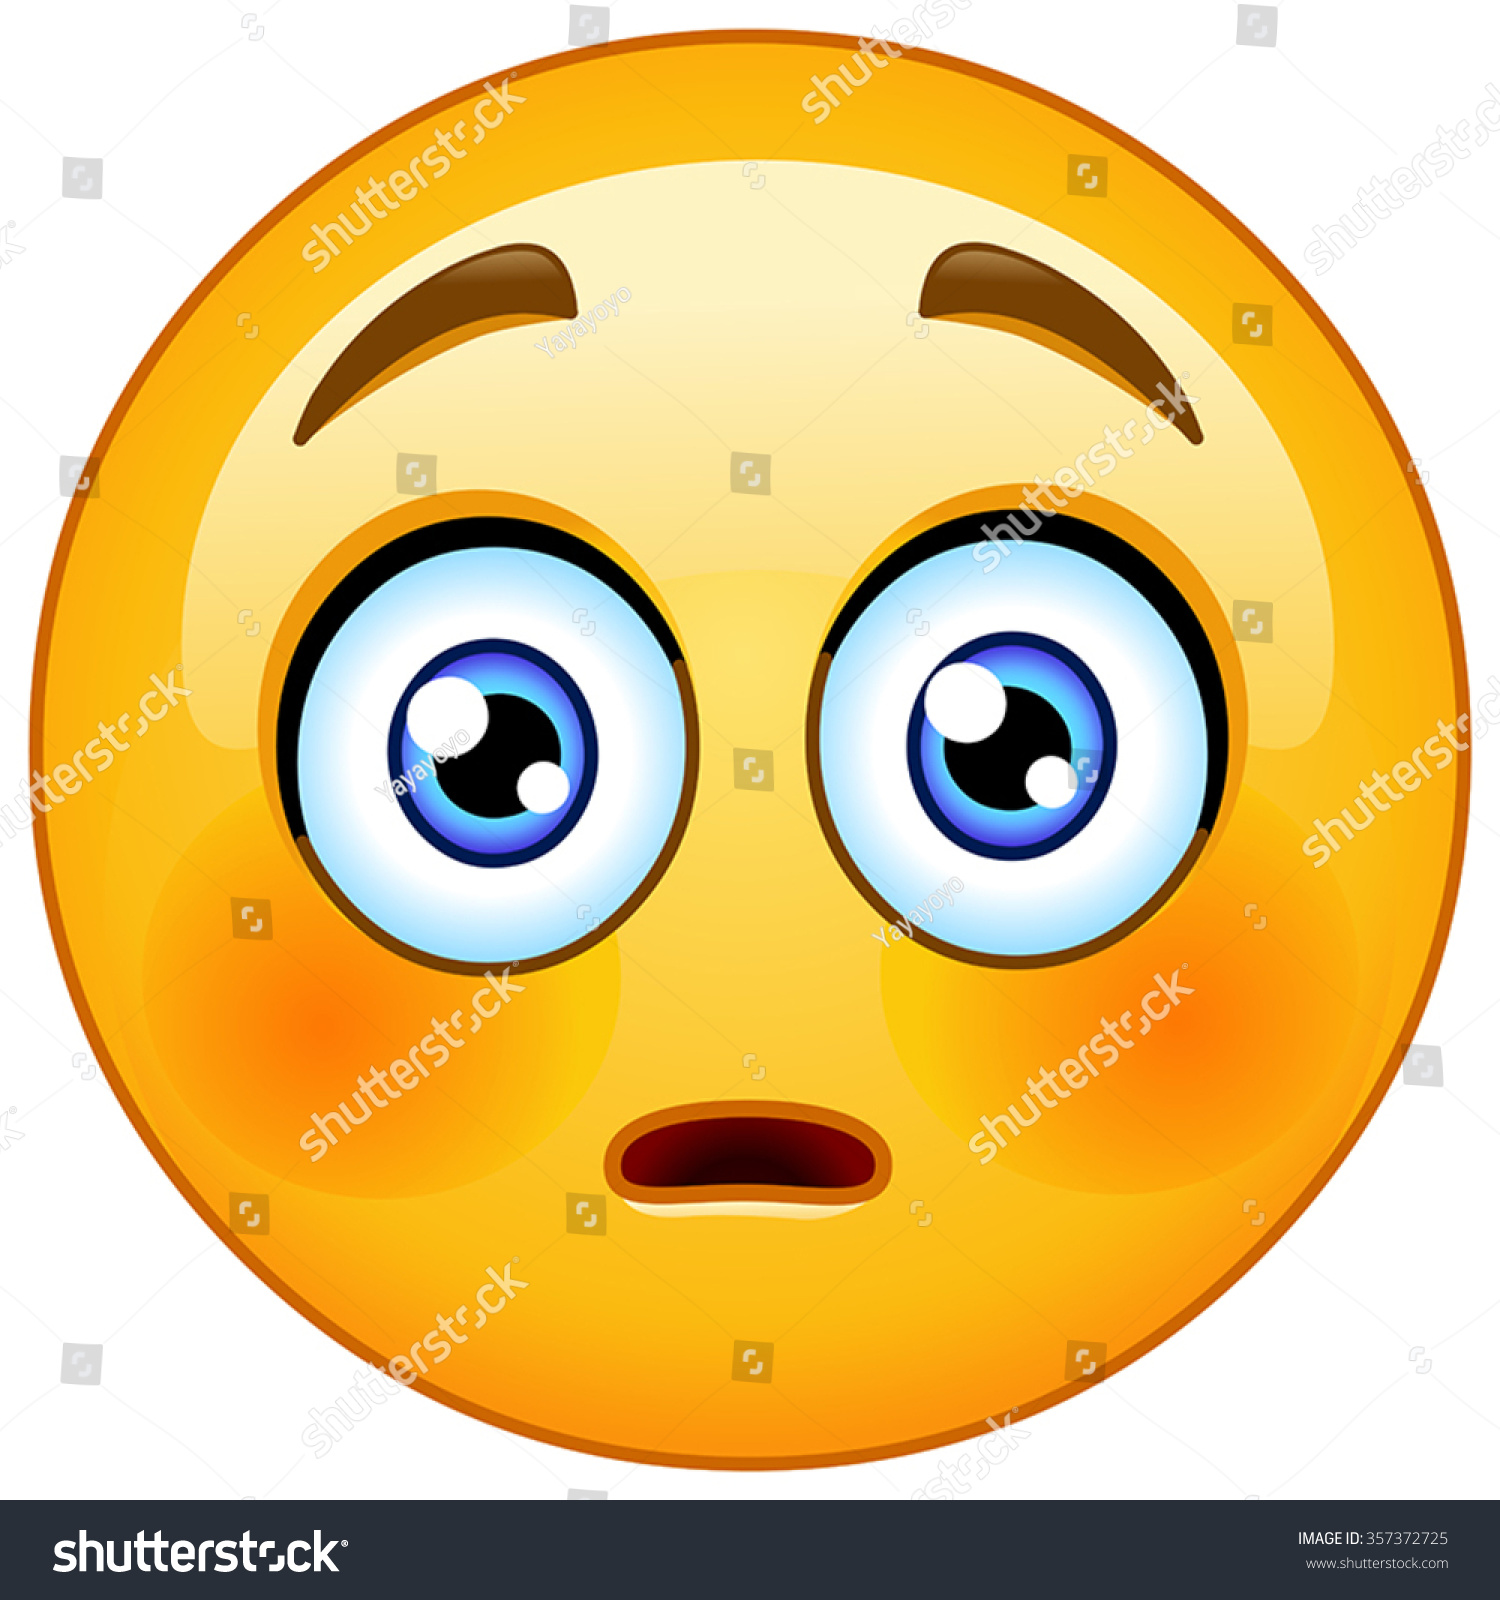 Embarrassed Emoticon With Flushed Red Cheeks Funny Emoji Faces Images 